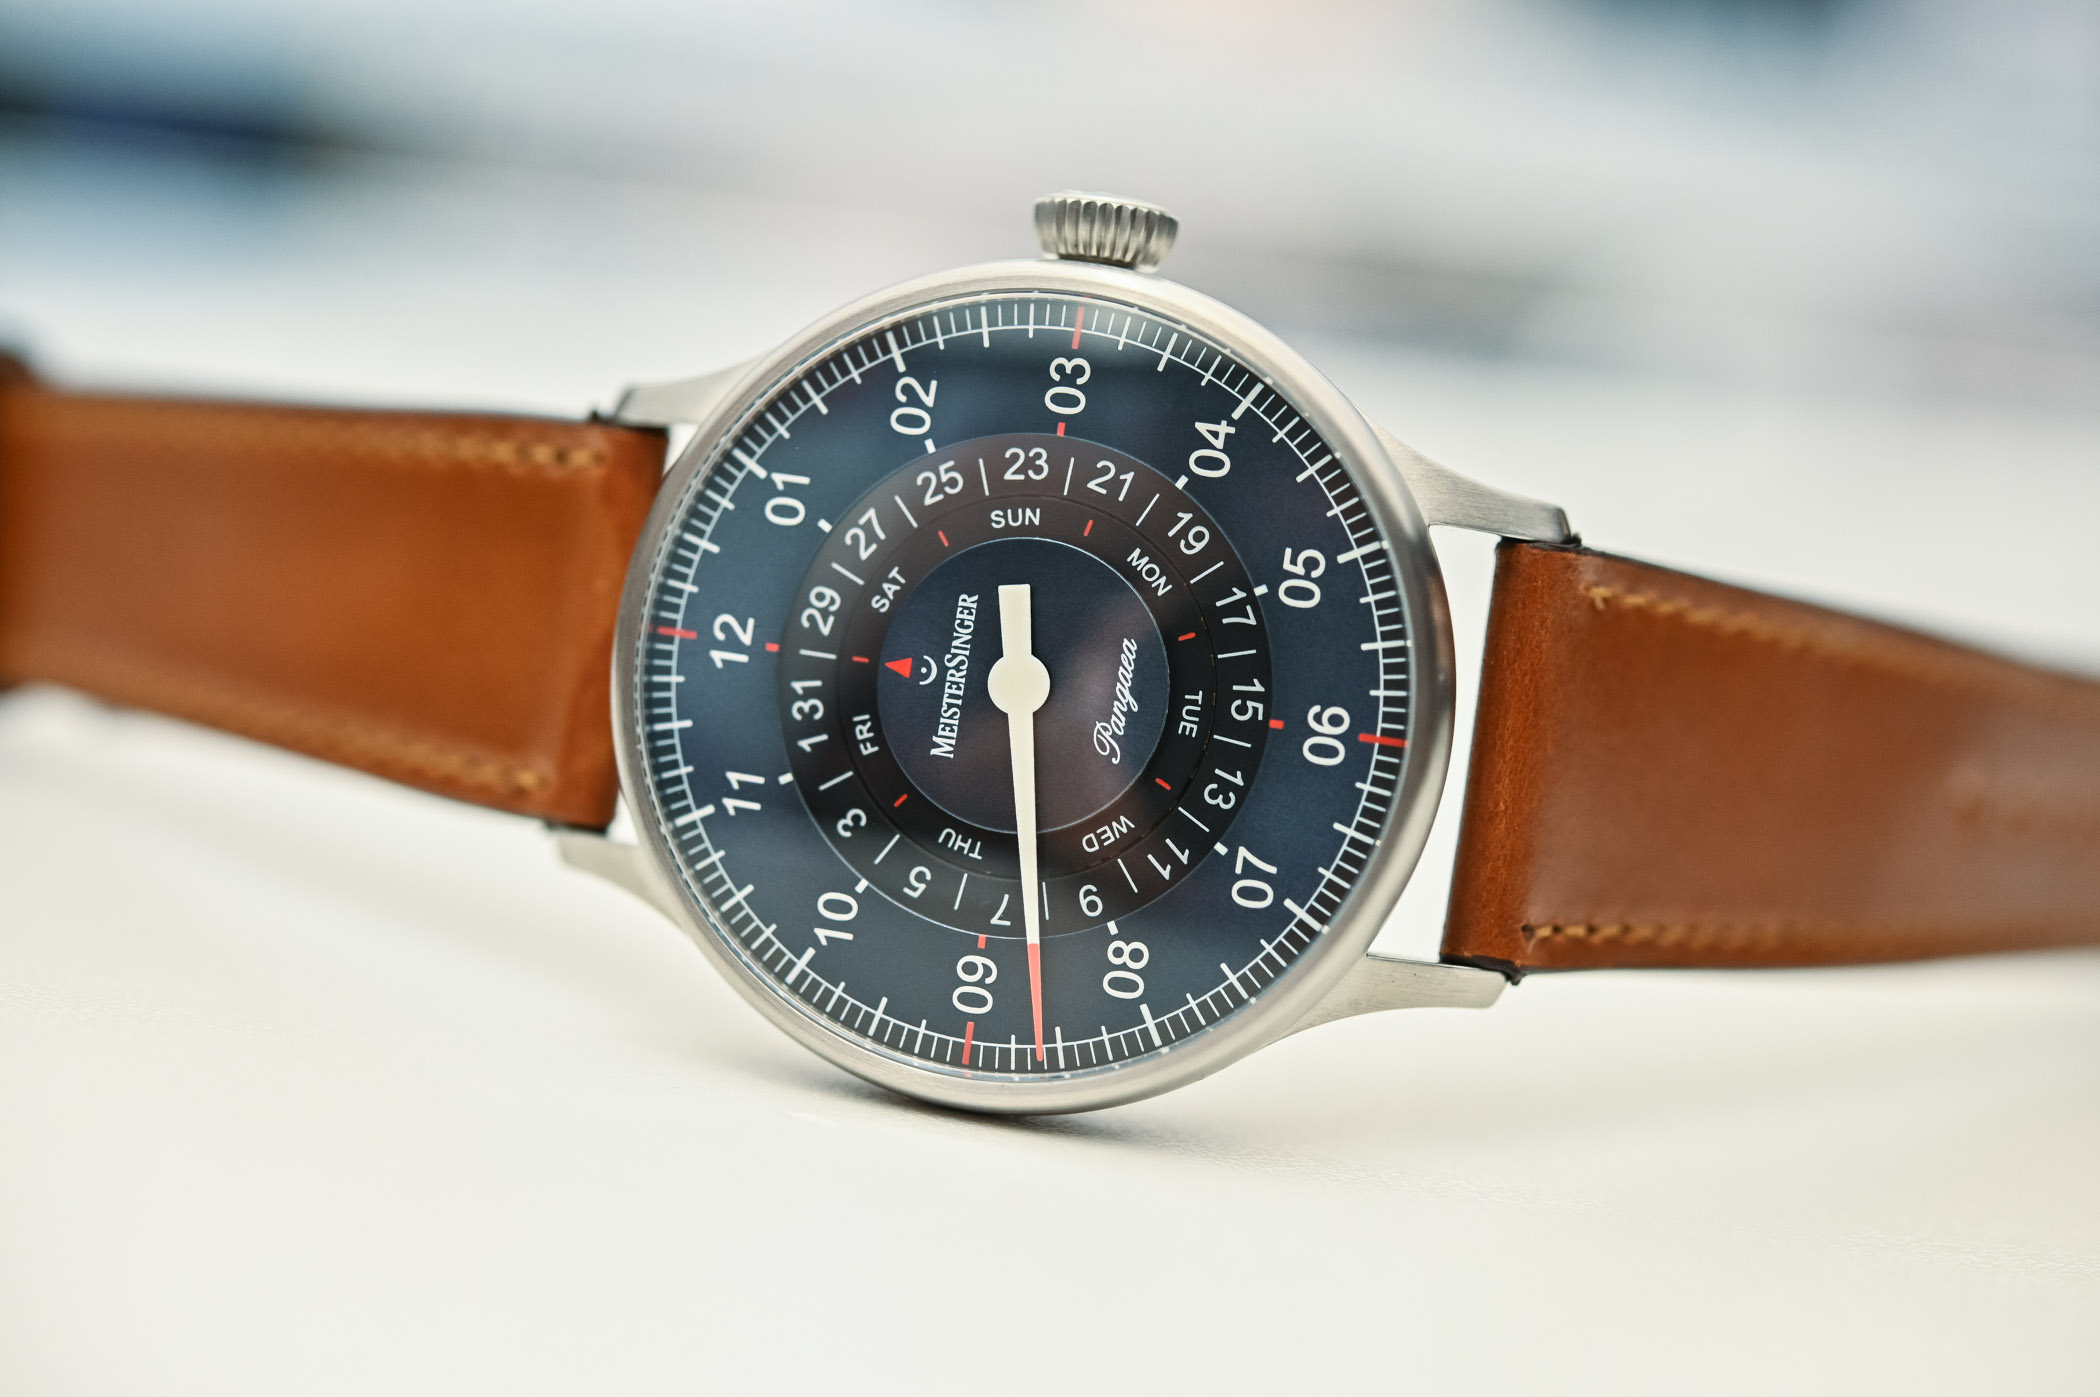 2019 Redesigned MeisterSinger Pangaea Day-Date